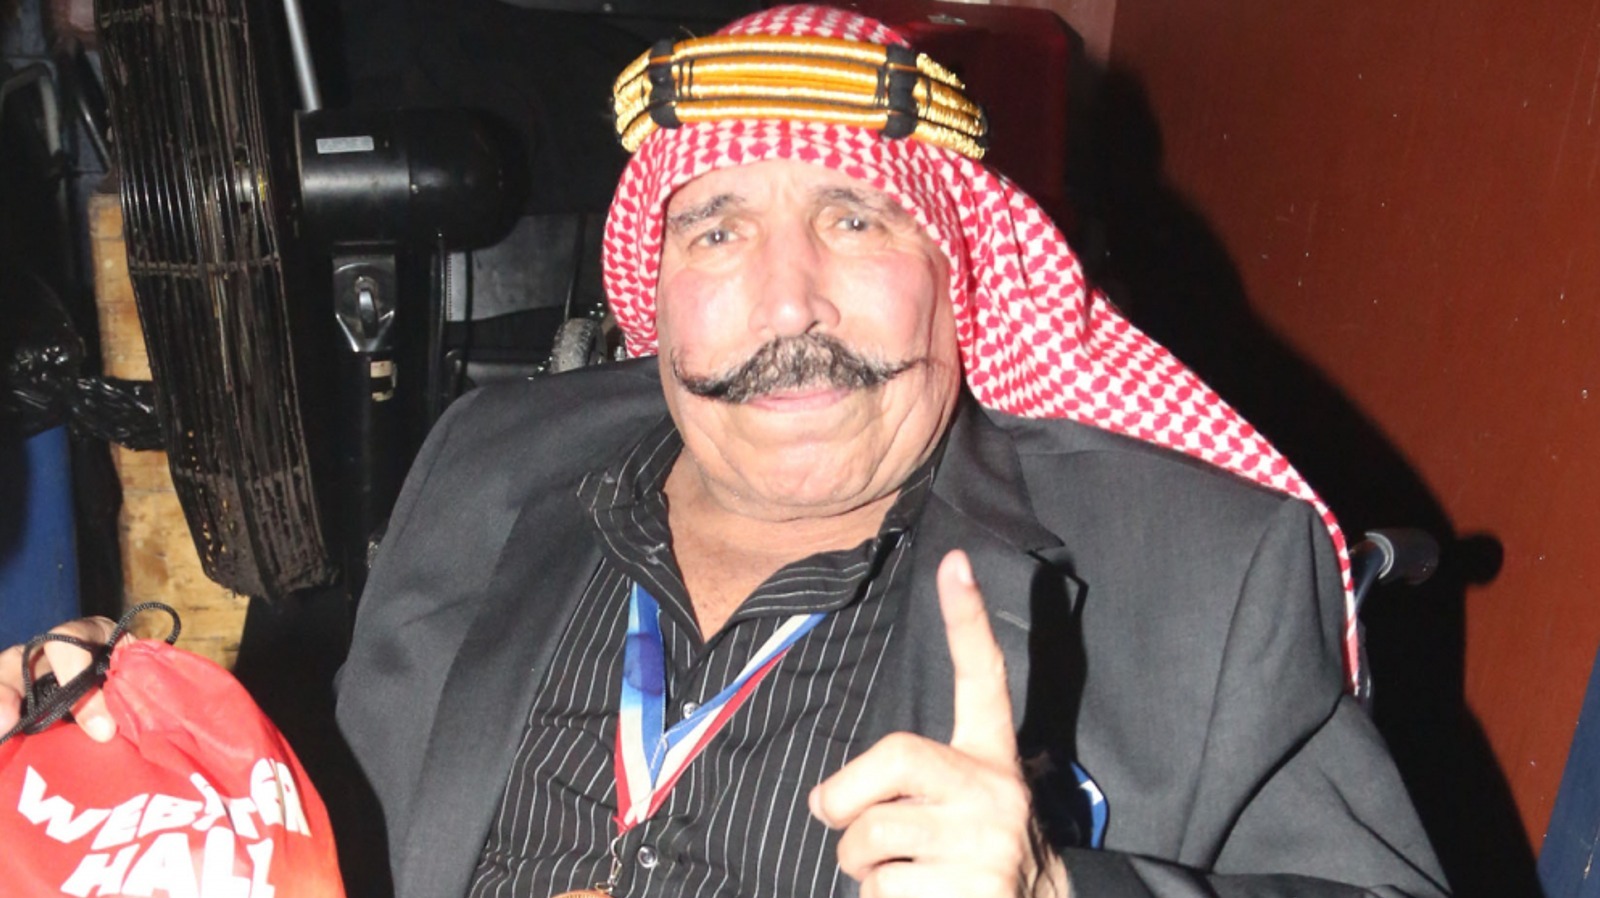 In The Iron Sheik's Legendary Career, One Moment Stands Out Above The Rest